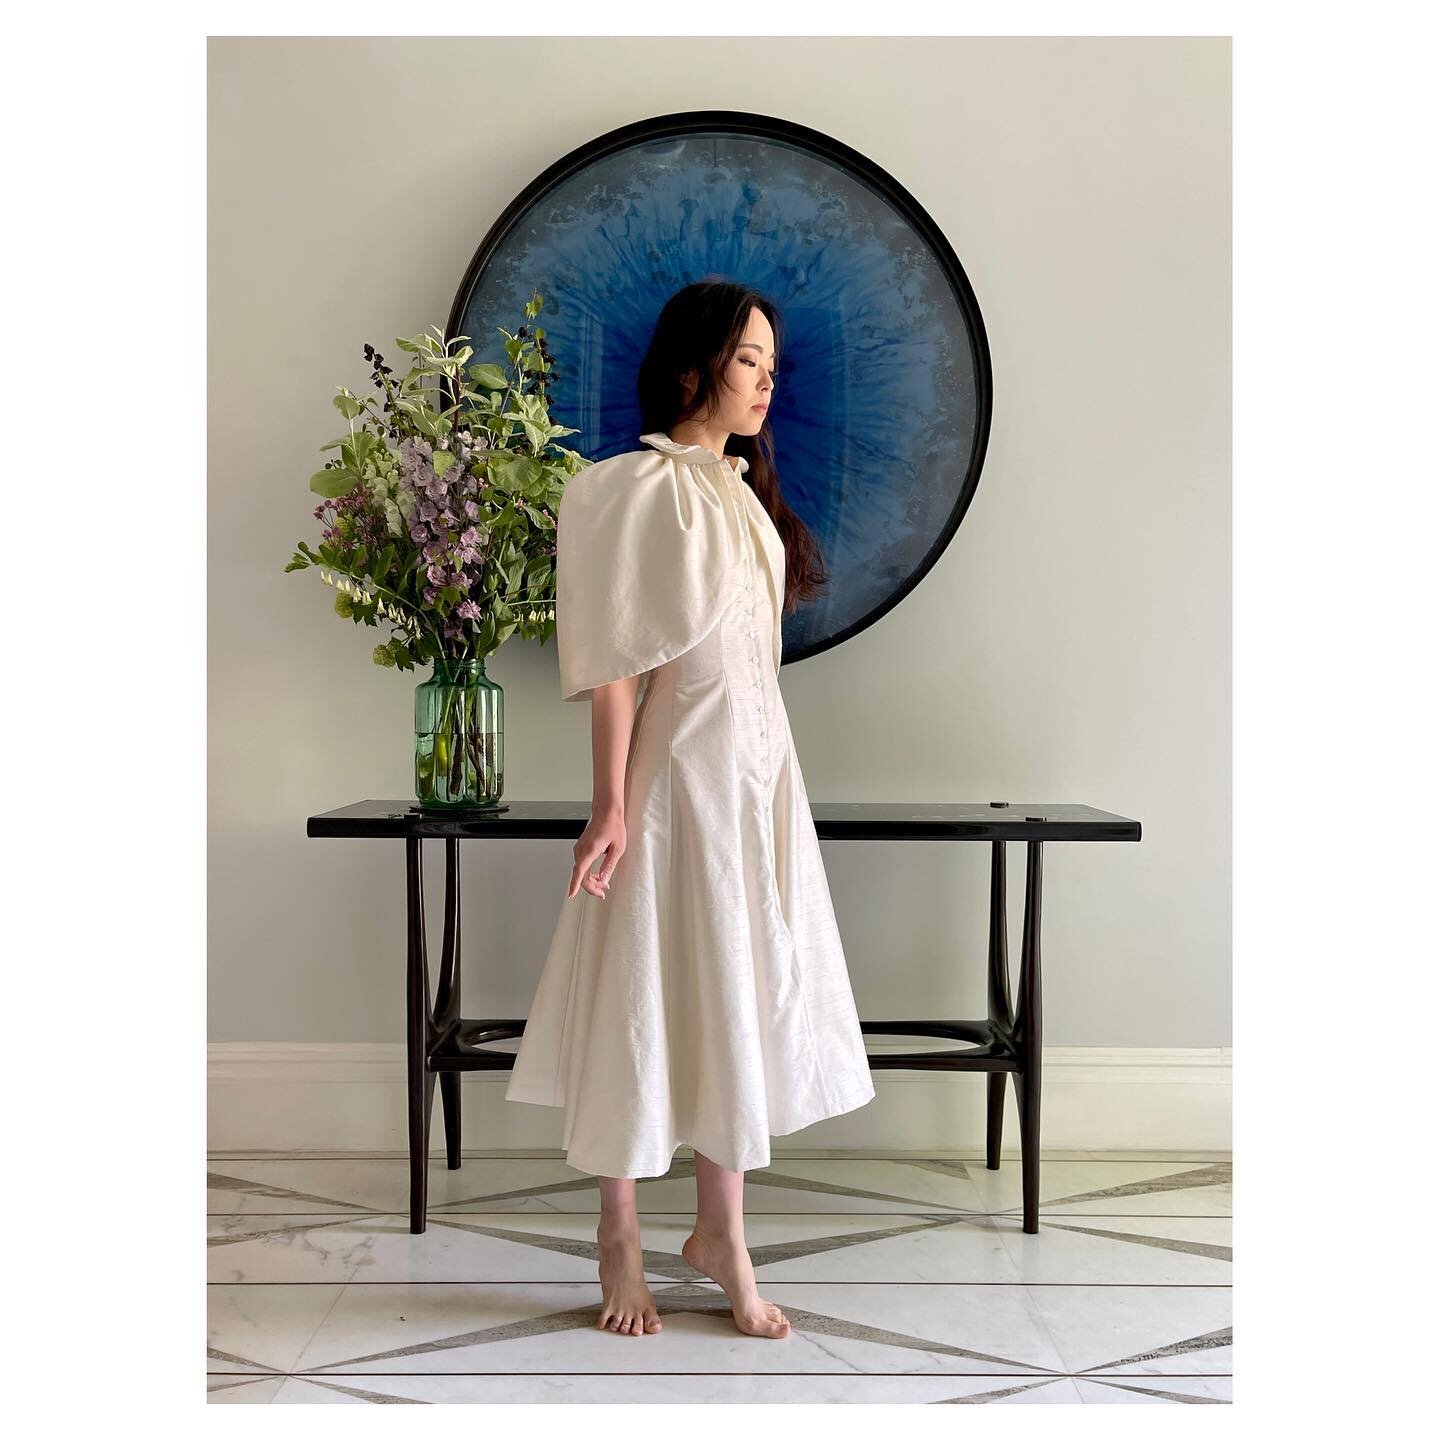 Beautiful soft raw silk wedding outfit with attached cape and ruffle collar

#weddingoutfit #civilwedding #gainsbourgatelier #contemporarycouture